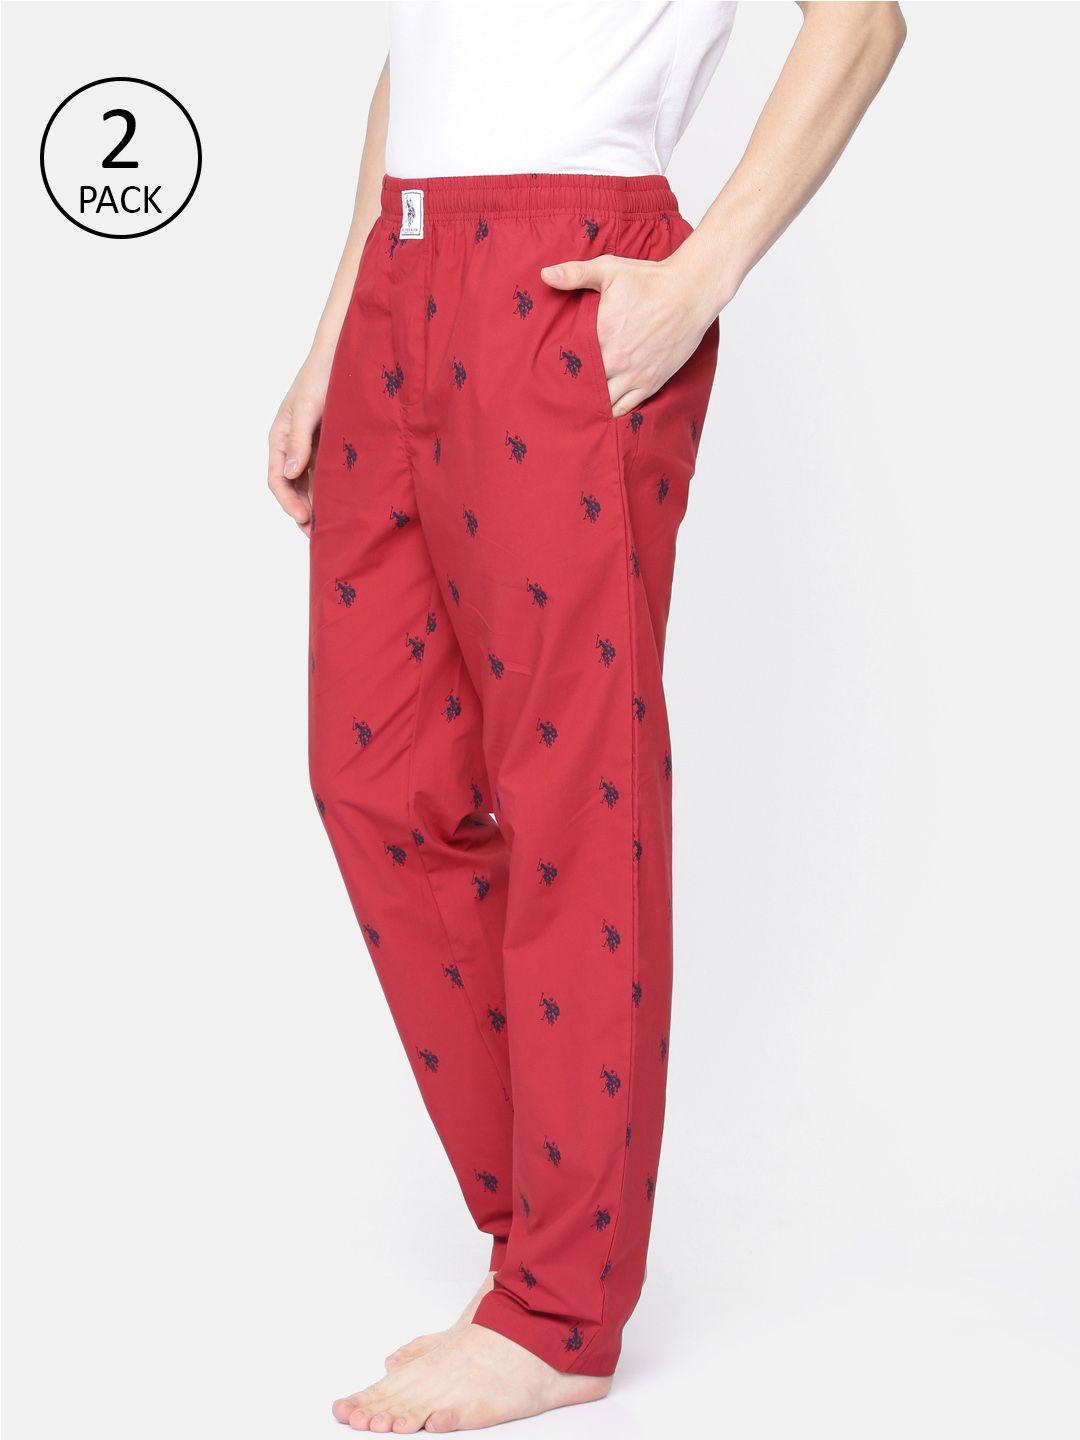 u.s. polo assn. men red and black printed lounge pants